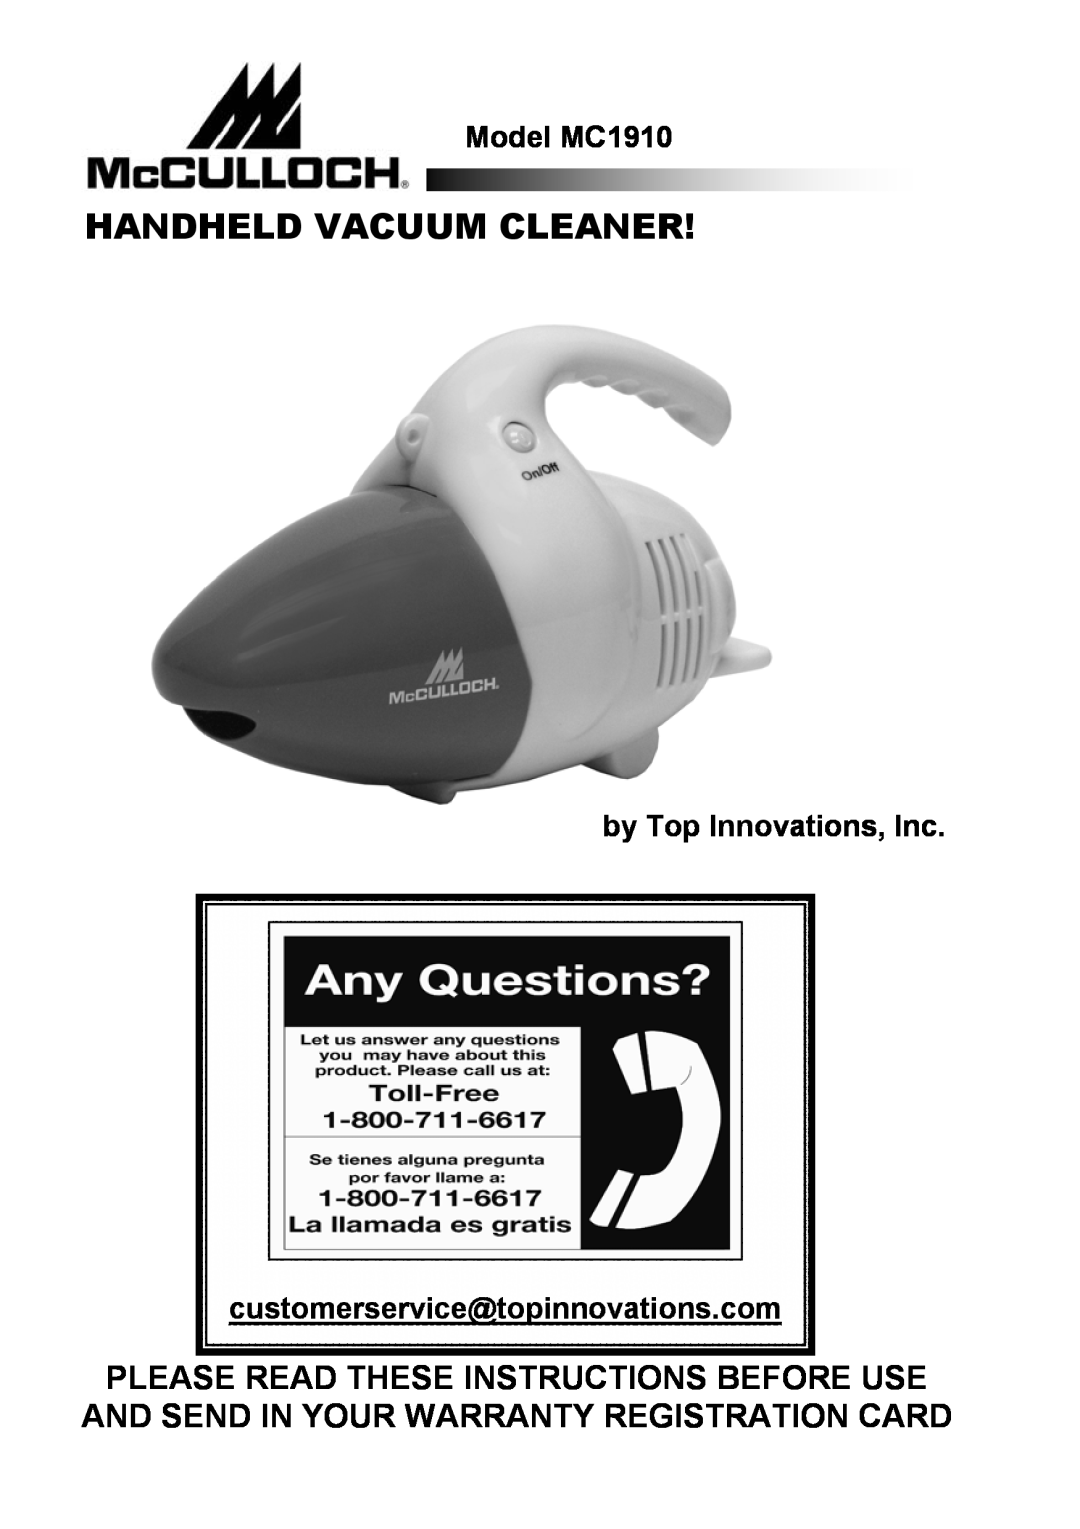 Top Innovations warranty Handheld Vacuum Cleaner, Model MC1910, by Top Innovations, Inc 